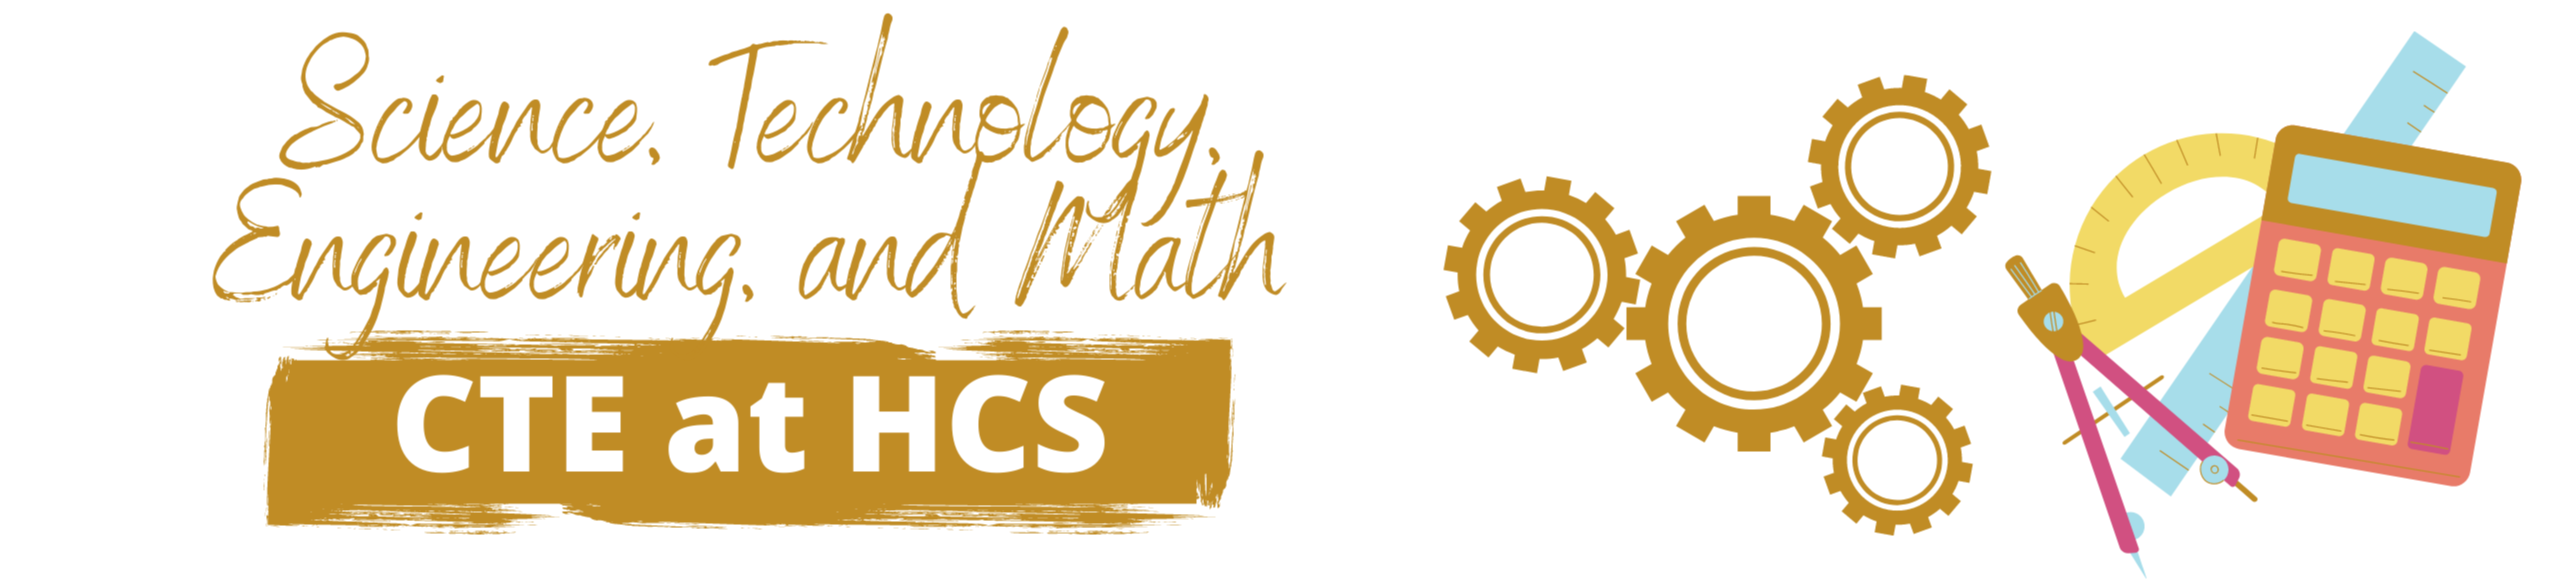 Science, Technology, Engineering and Mathematics 